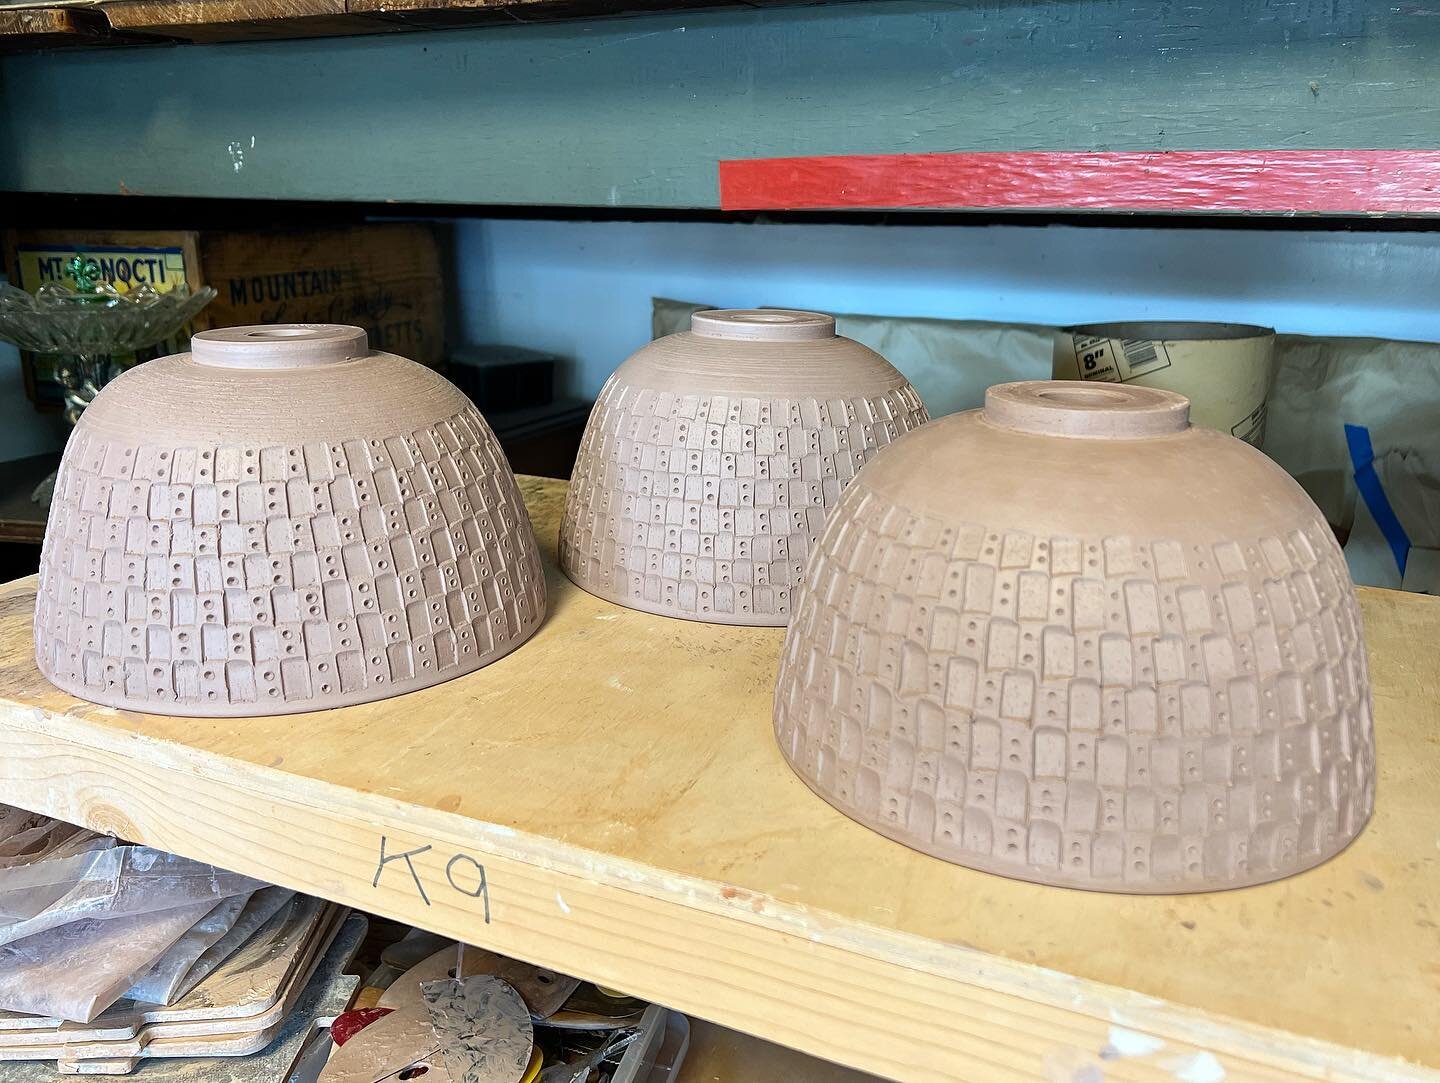 So happy I got to work with @tomeceramics on these lamp shades for @studiounltd They came out great! And what&rsquo;s better than keeping it local #handmadeinla

Here are a few progress shots from raw clay to finished product and my makeshift workspa